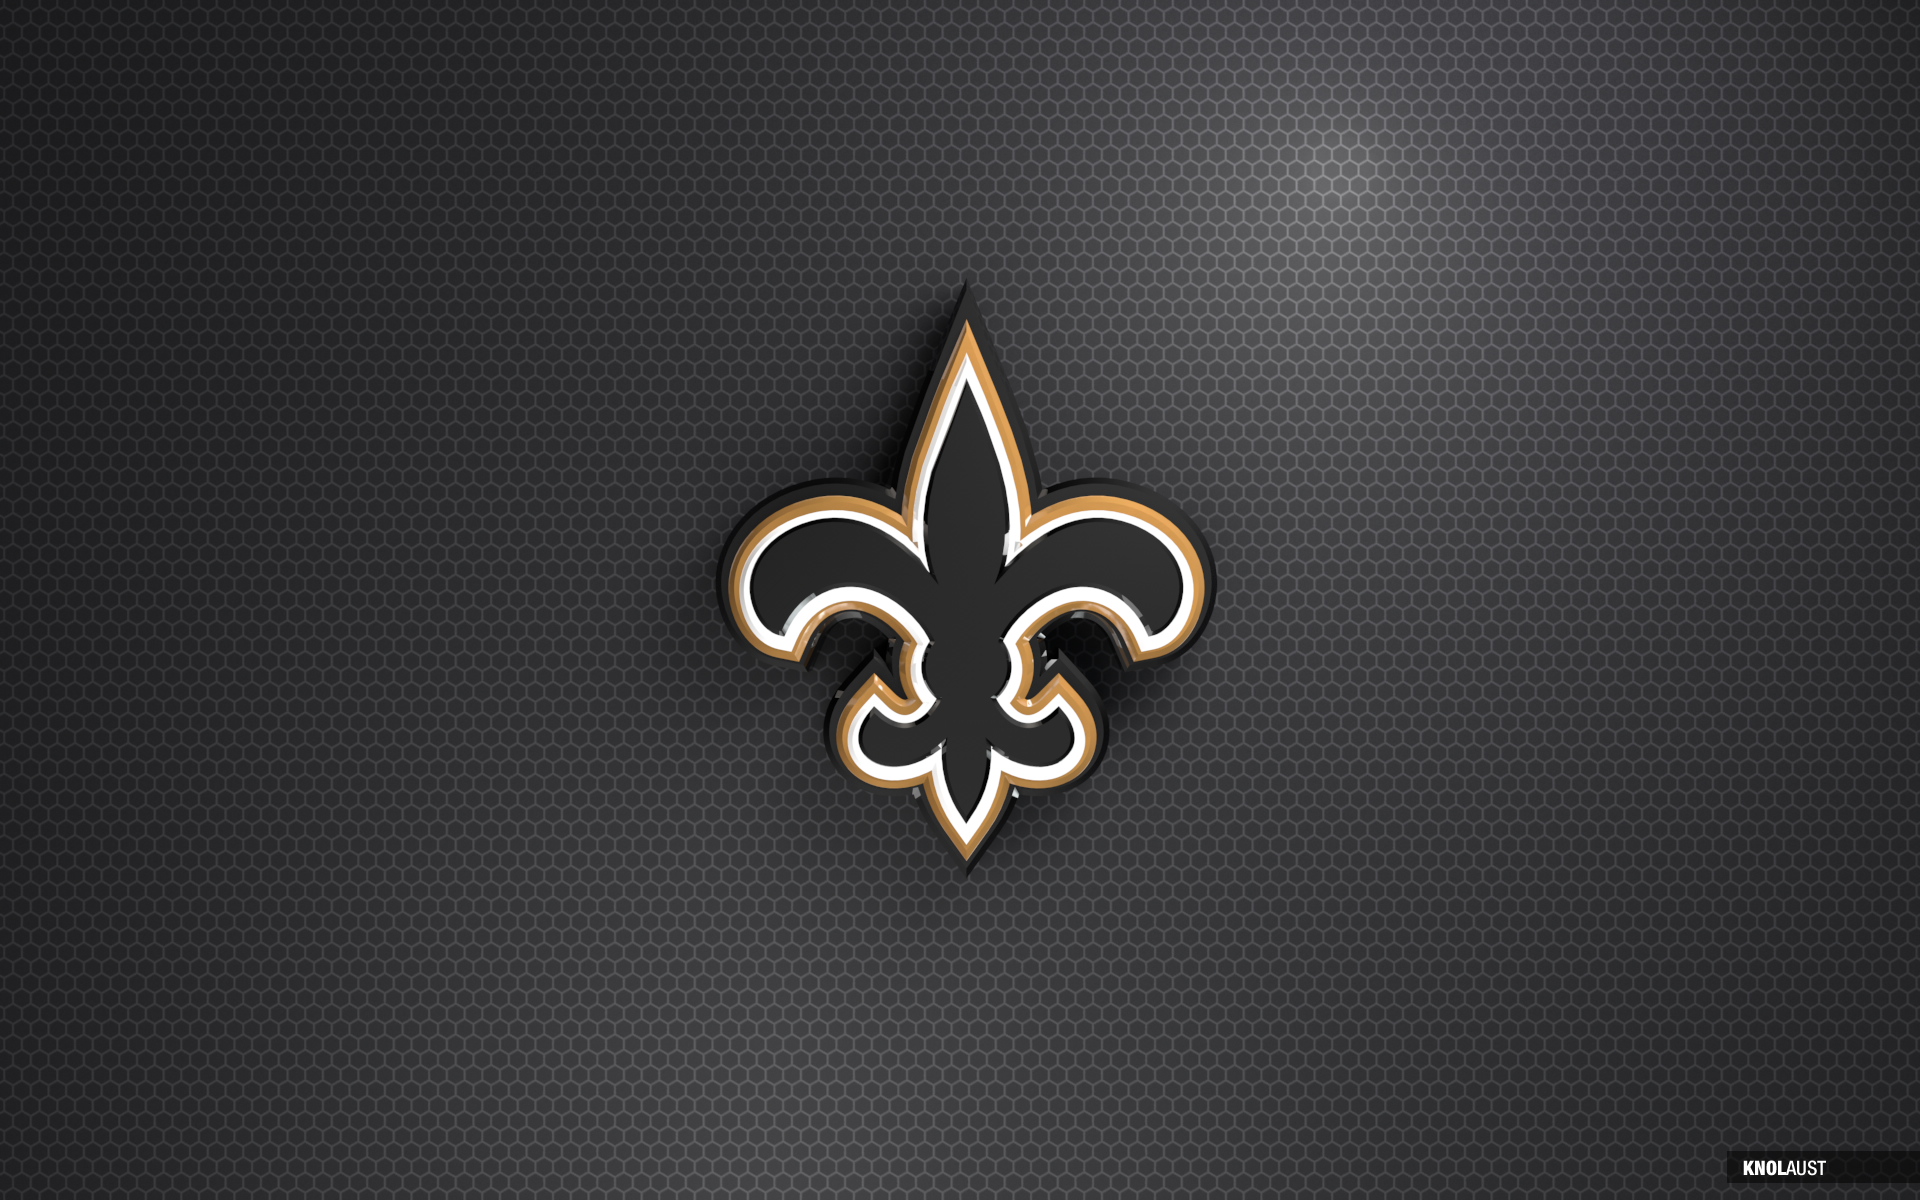 Watch Saints rookies struggle to draw their new teams logo in hilarious  video